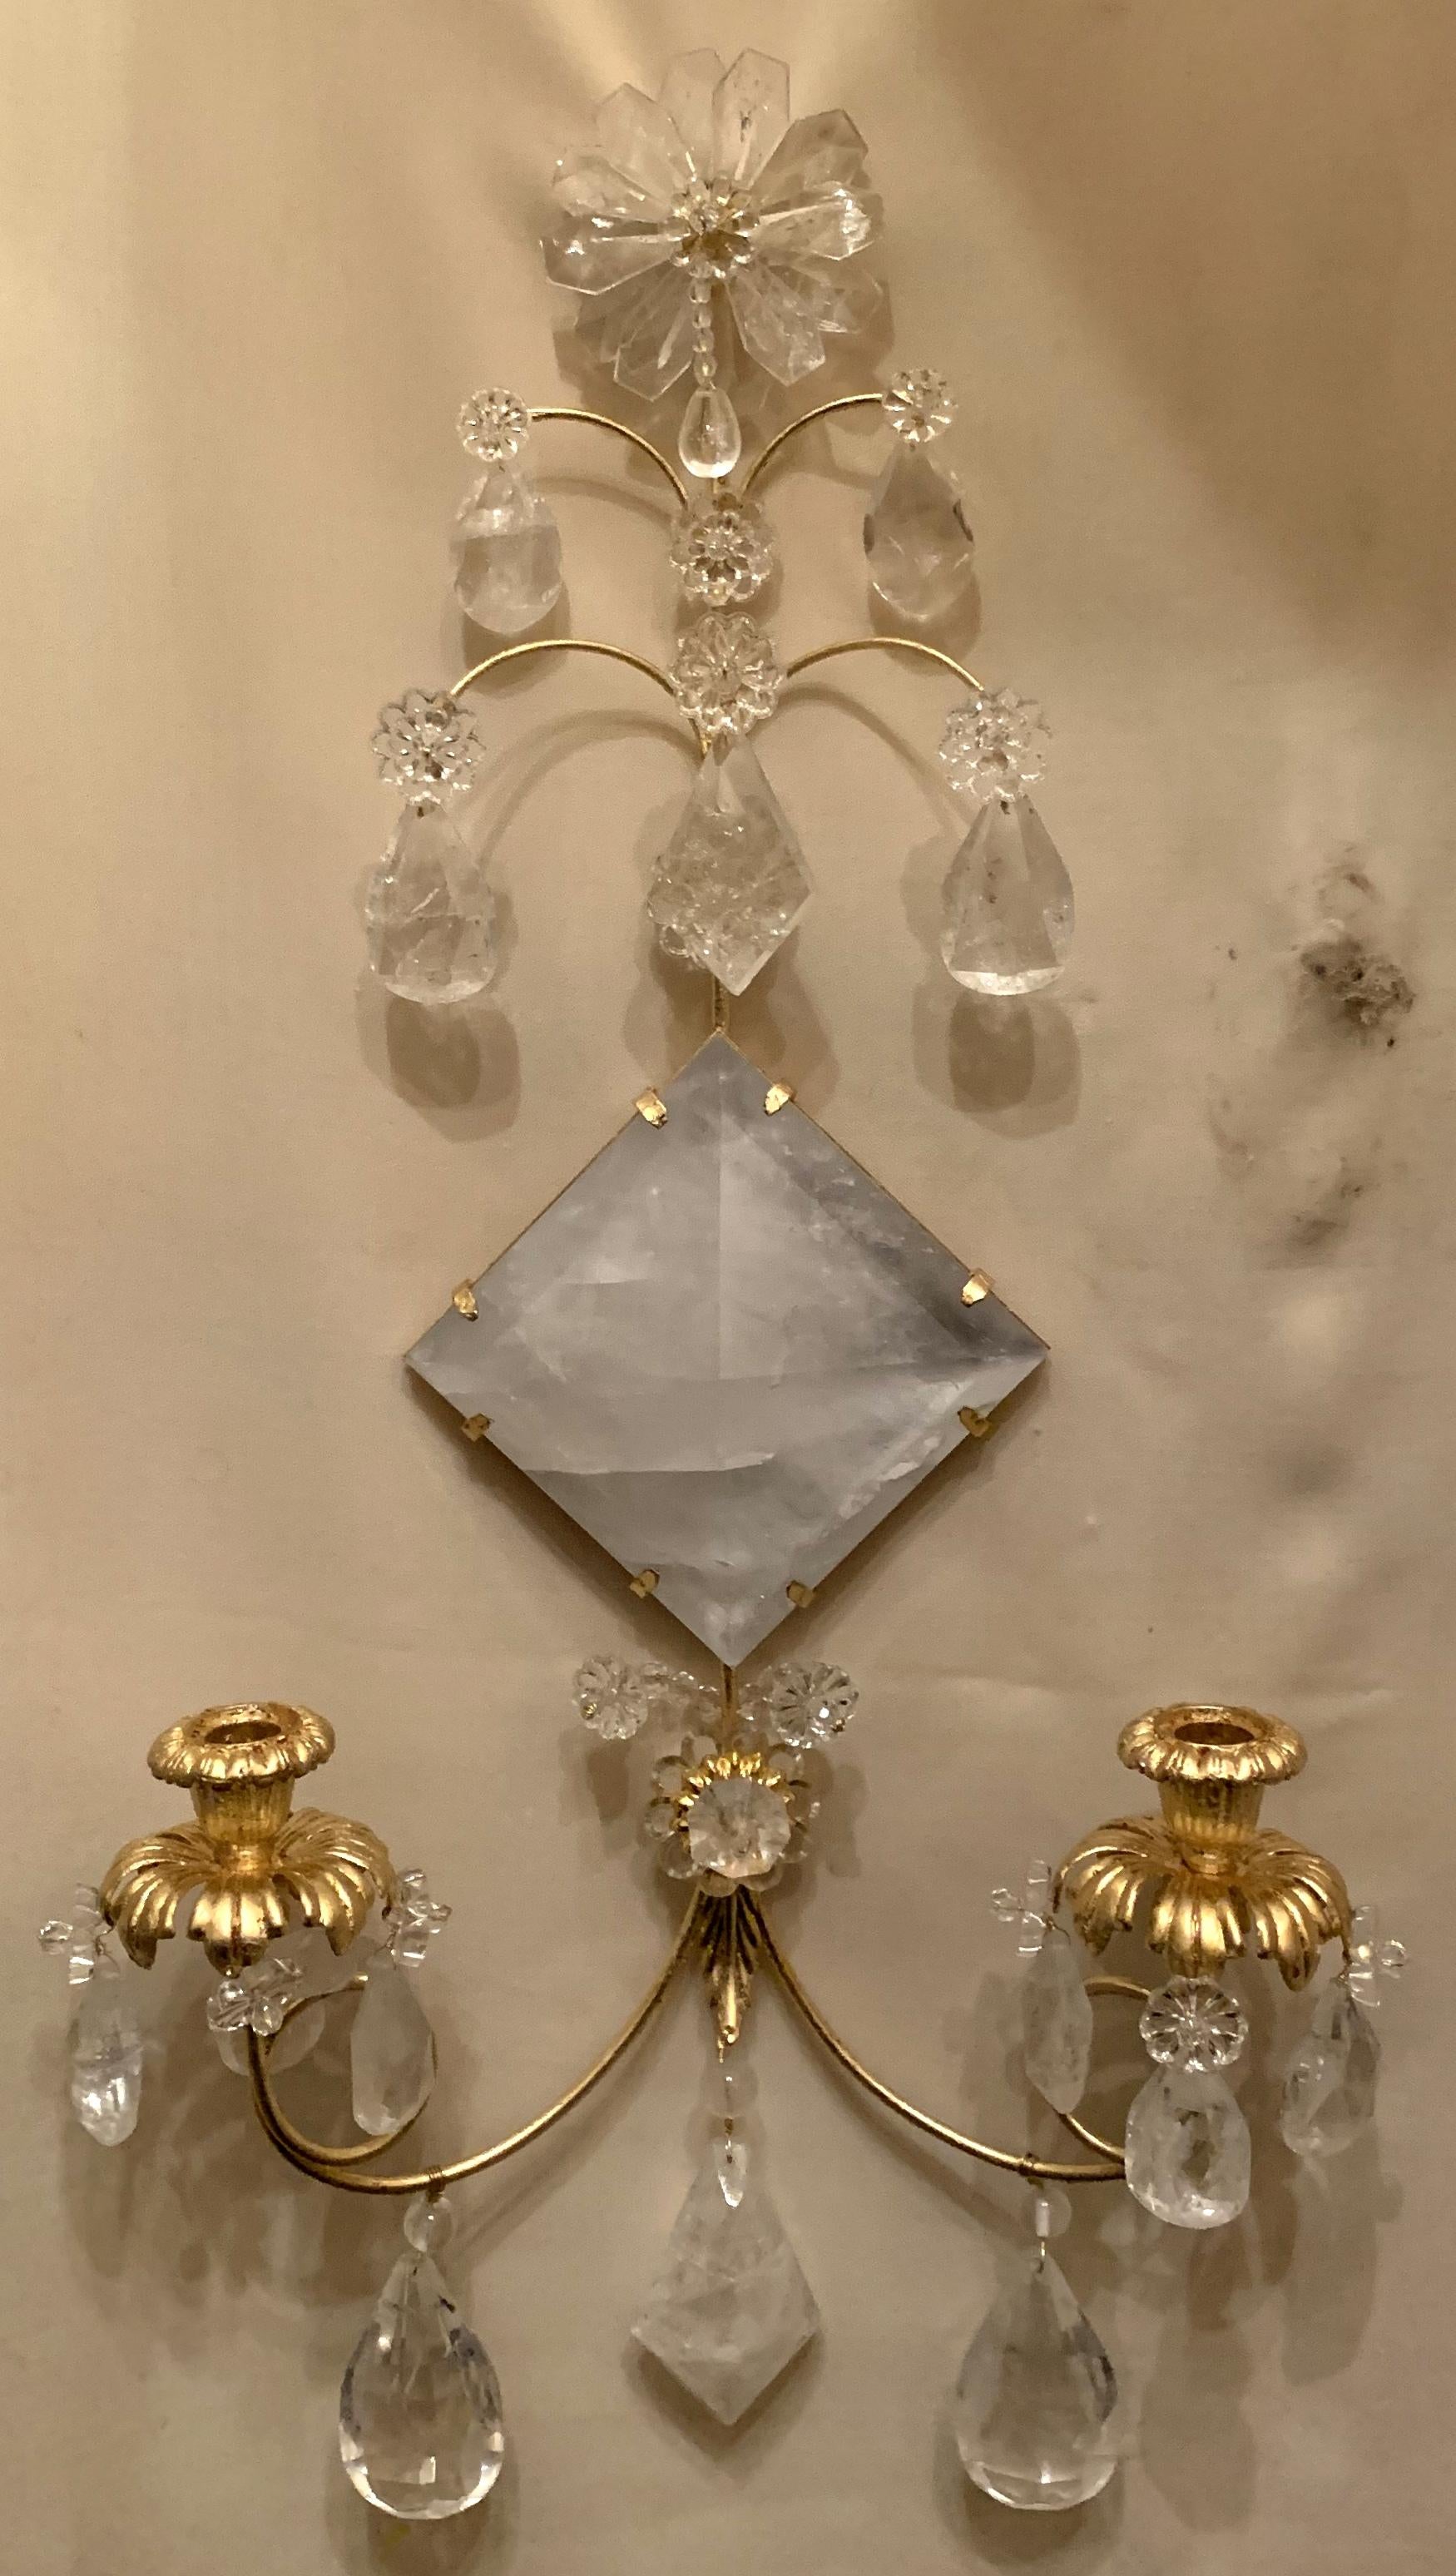 A wonderful Mid-Century Modern pair of transitional gold leaf and rock crystal sconces.
Also available in silver leaf.

Wiring is available.